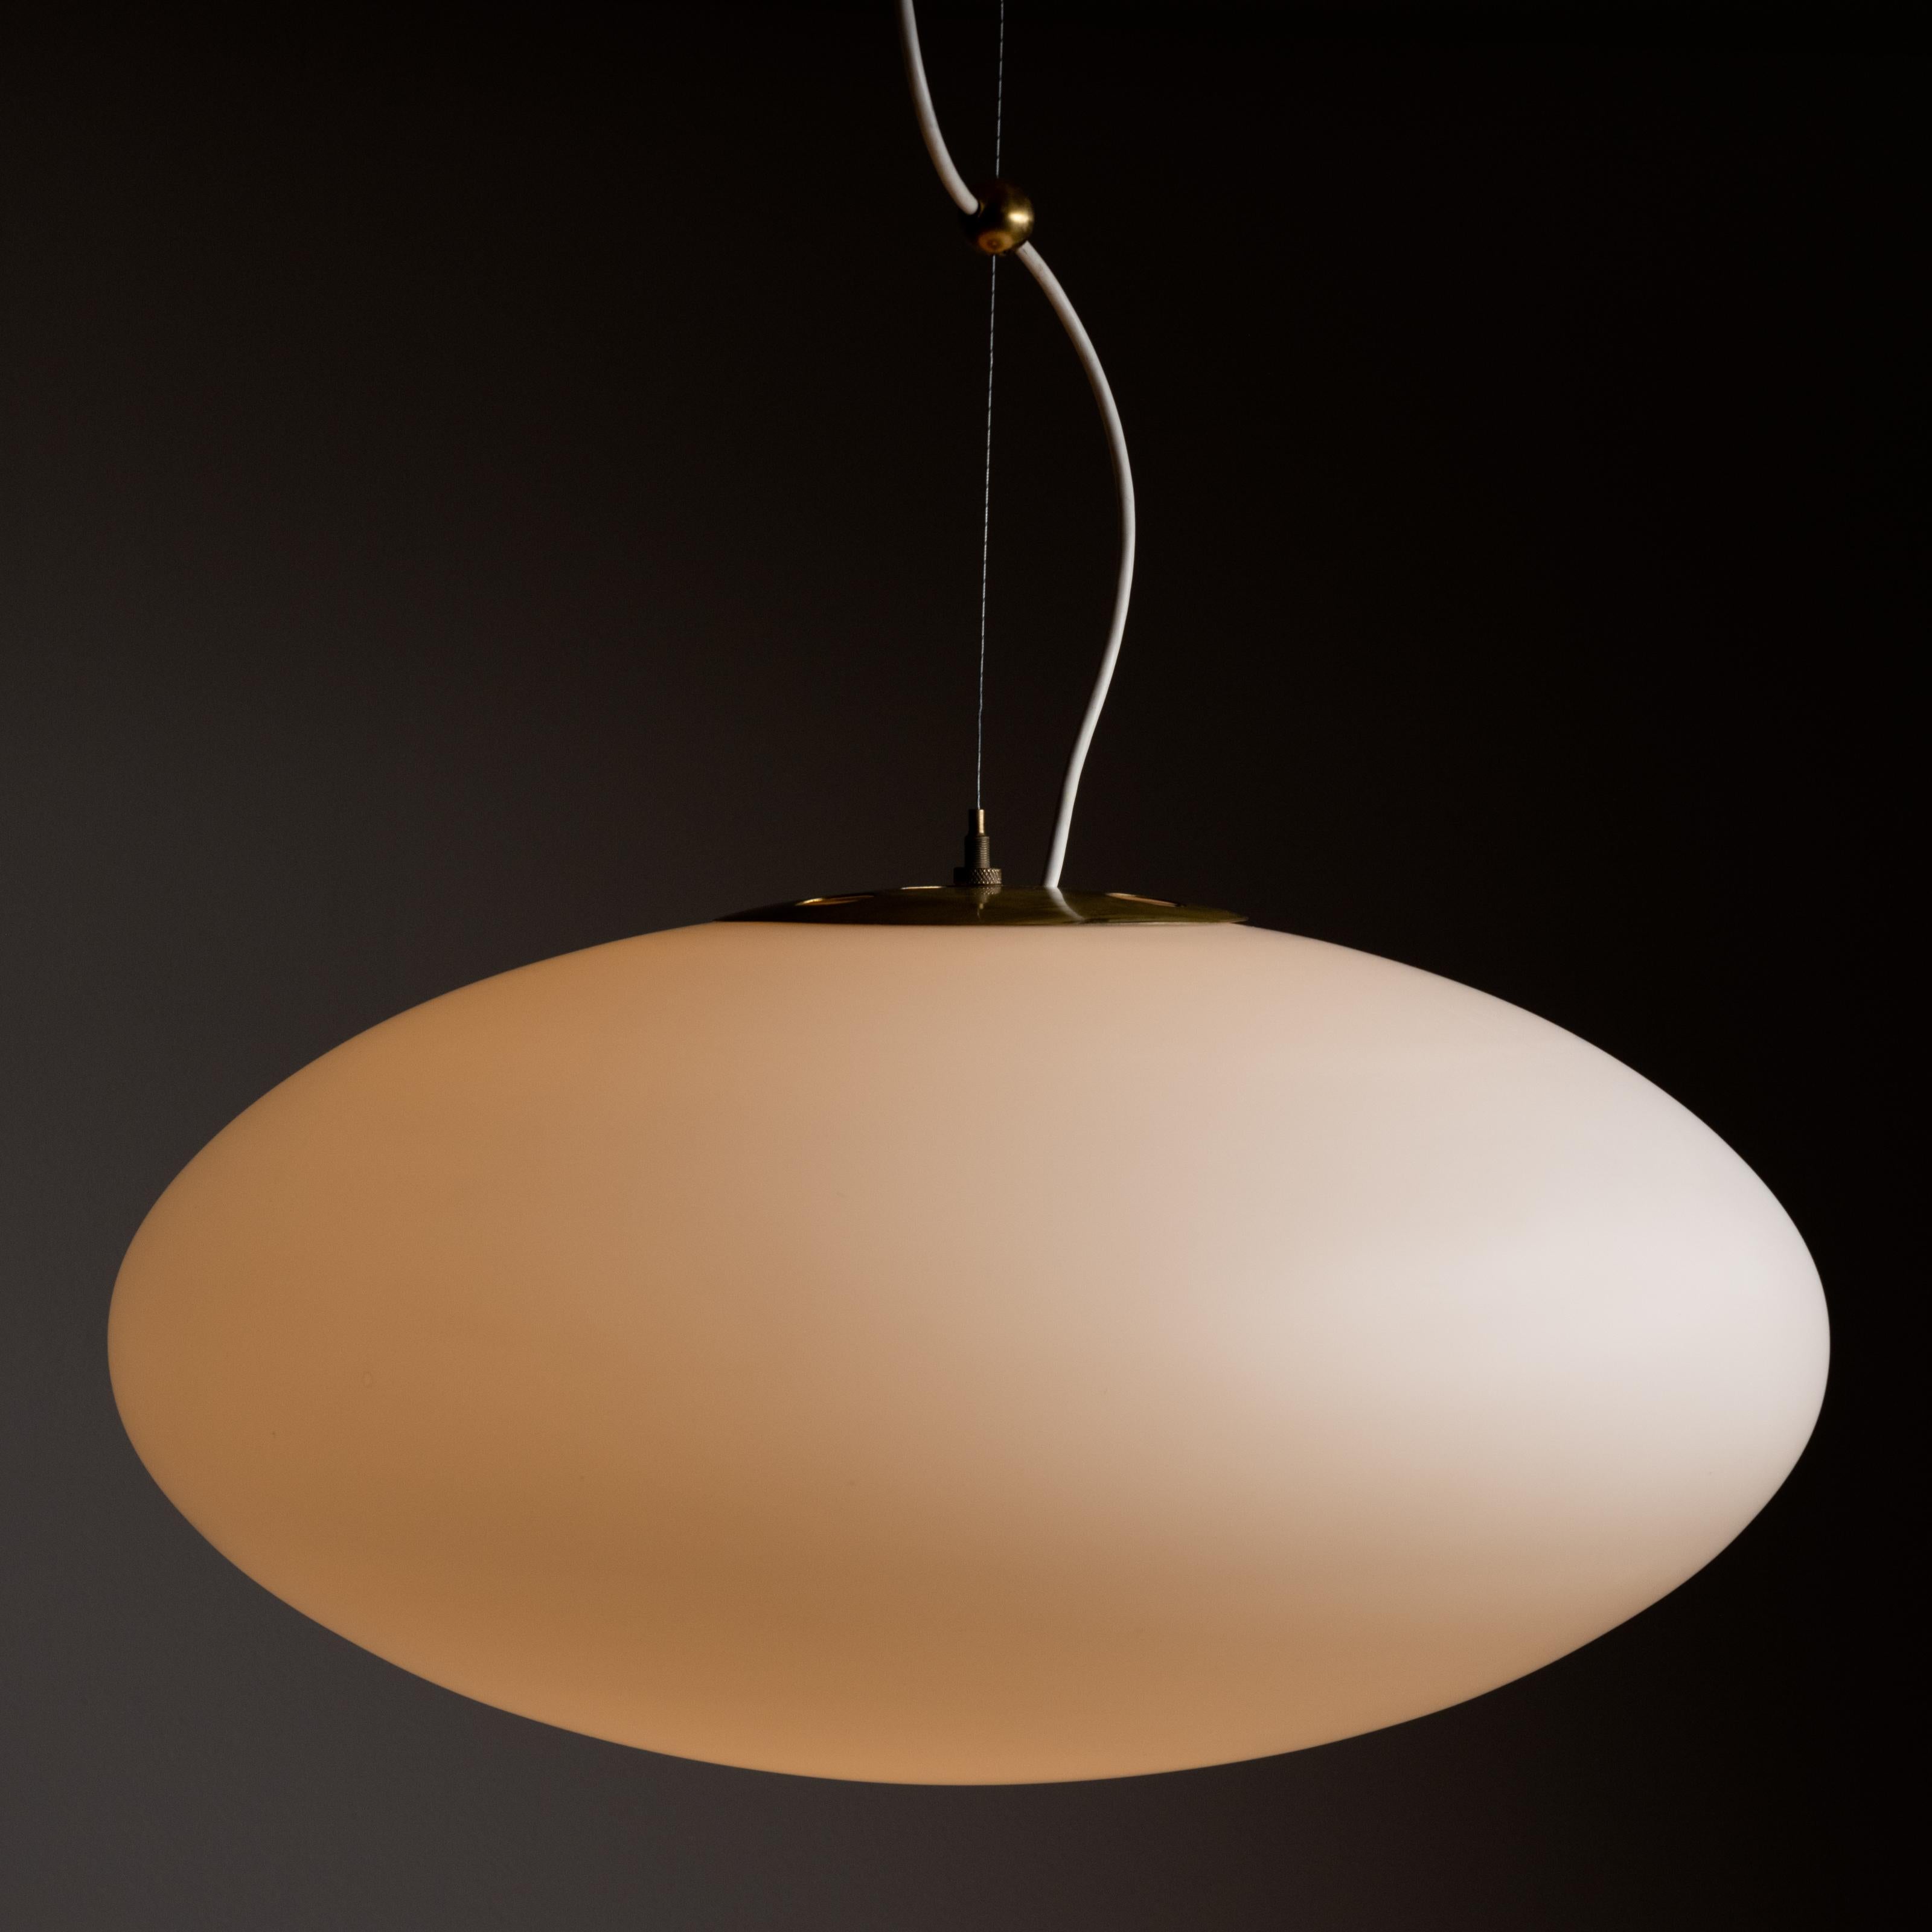 Model 1187 ceiling lamp by Gaetano Sciolari for Stilnovo. Designed and manufactured in Italy, 1953. Ceiling mounted by brass dome canopy, wire length is slightly adjustable with wire pulley detail. Opal glass lantern provides soft and ambient